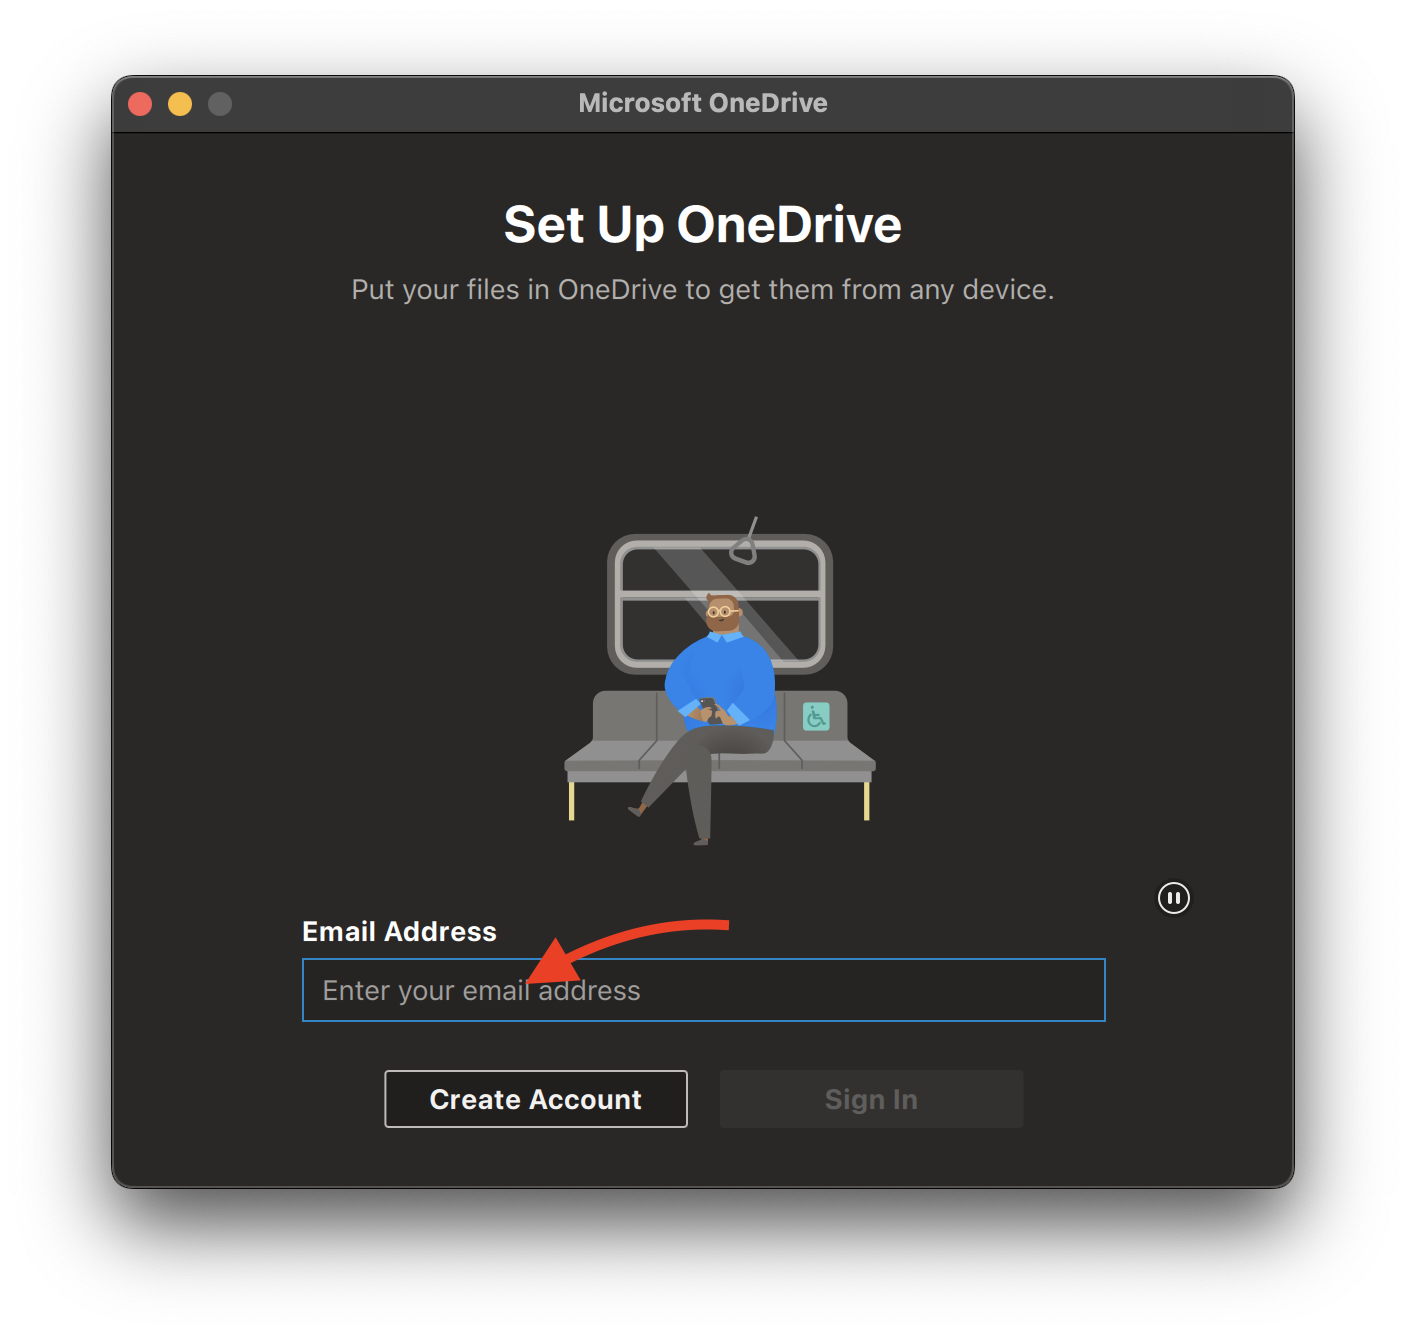 Enter Your Email to Setup Up OneDrive